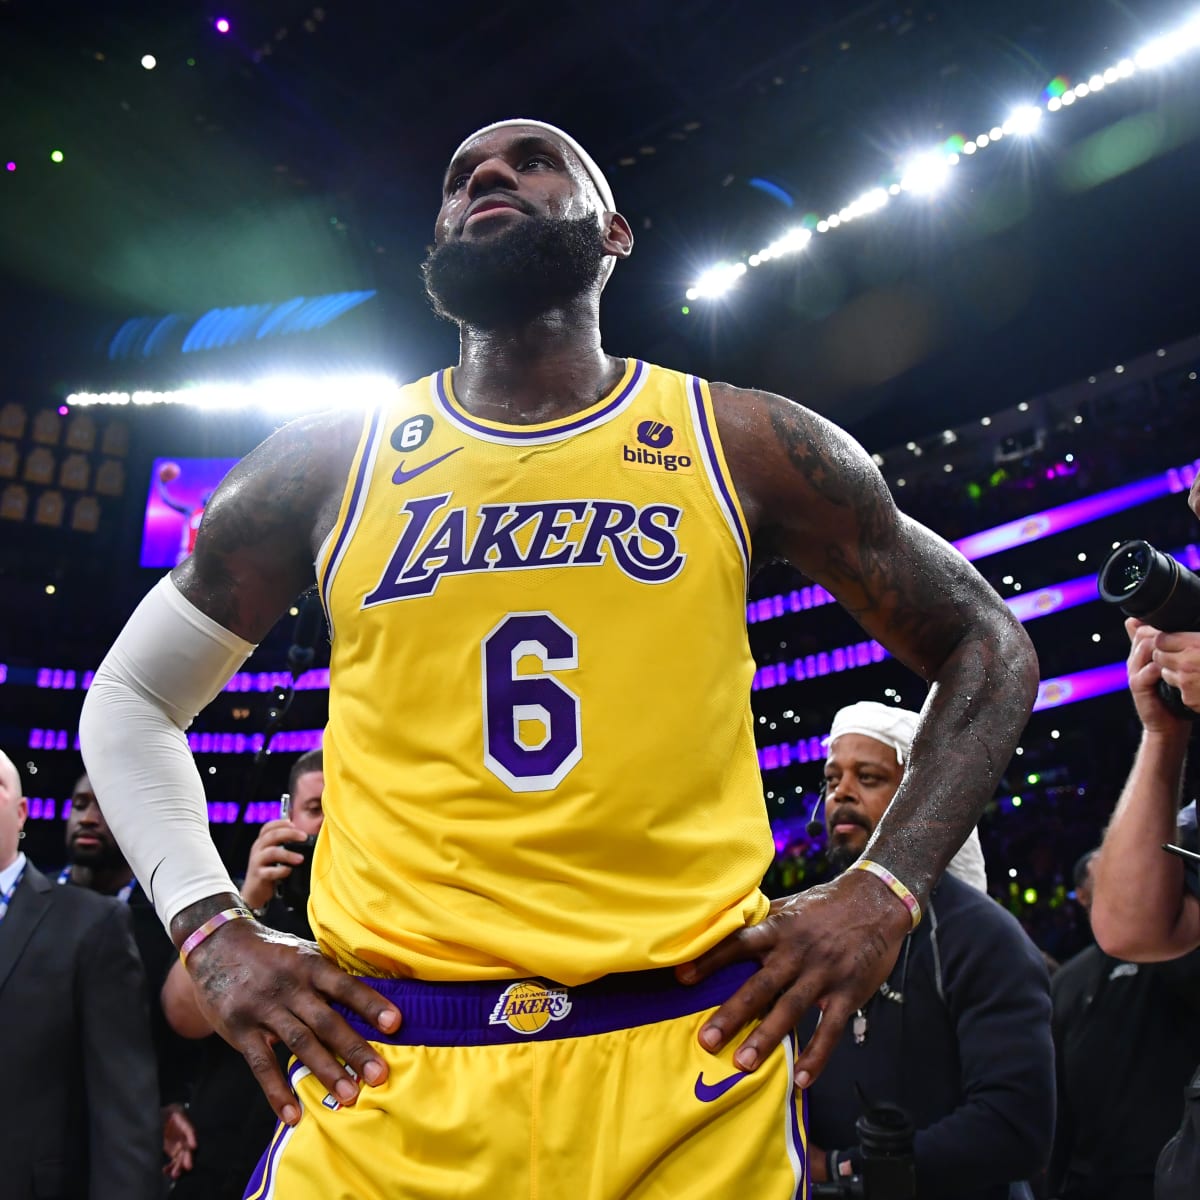 LeBron James refuses to greet Grizzlies after Lakers win by 40 points